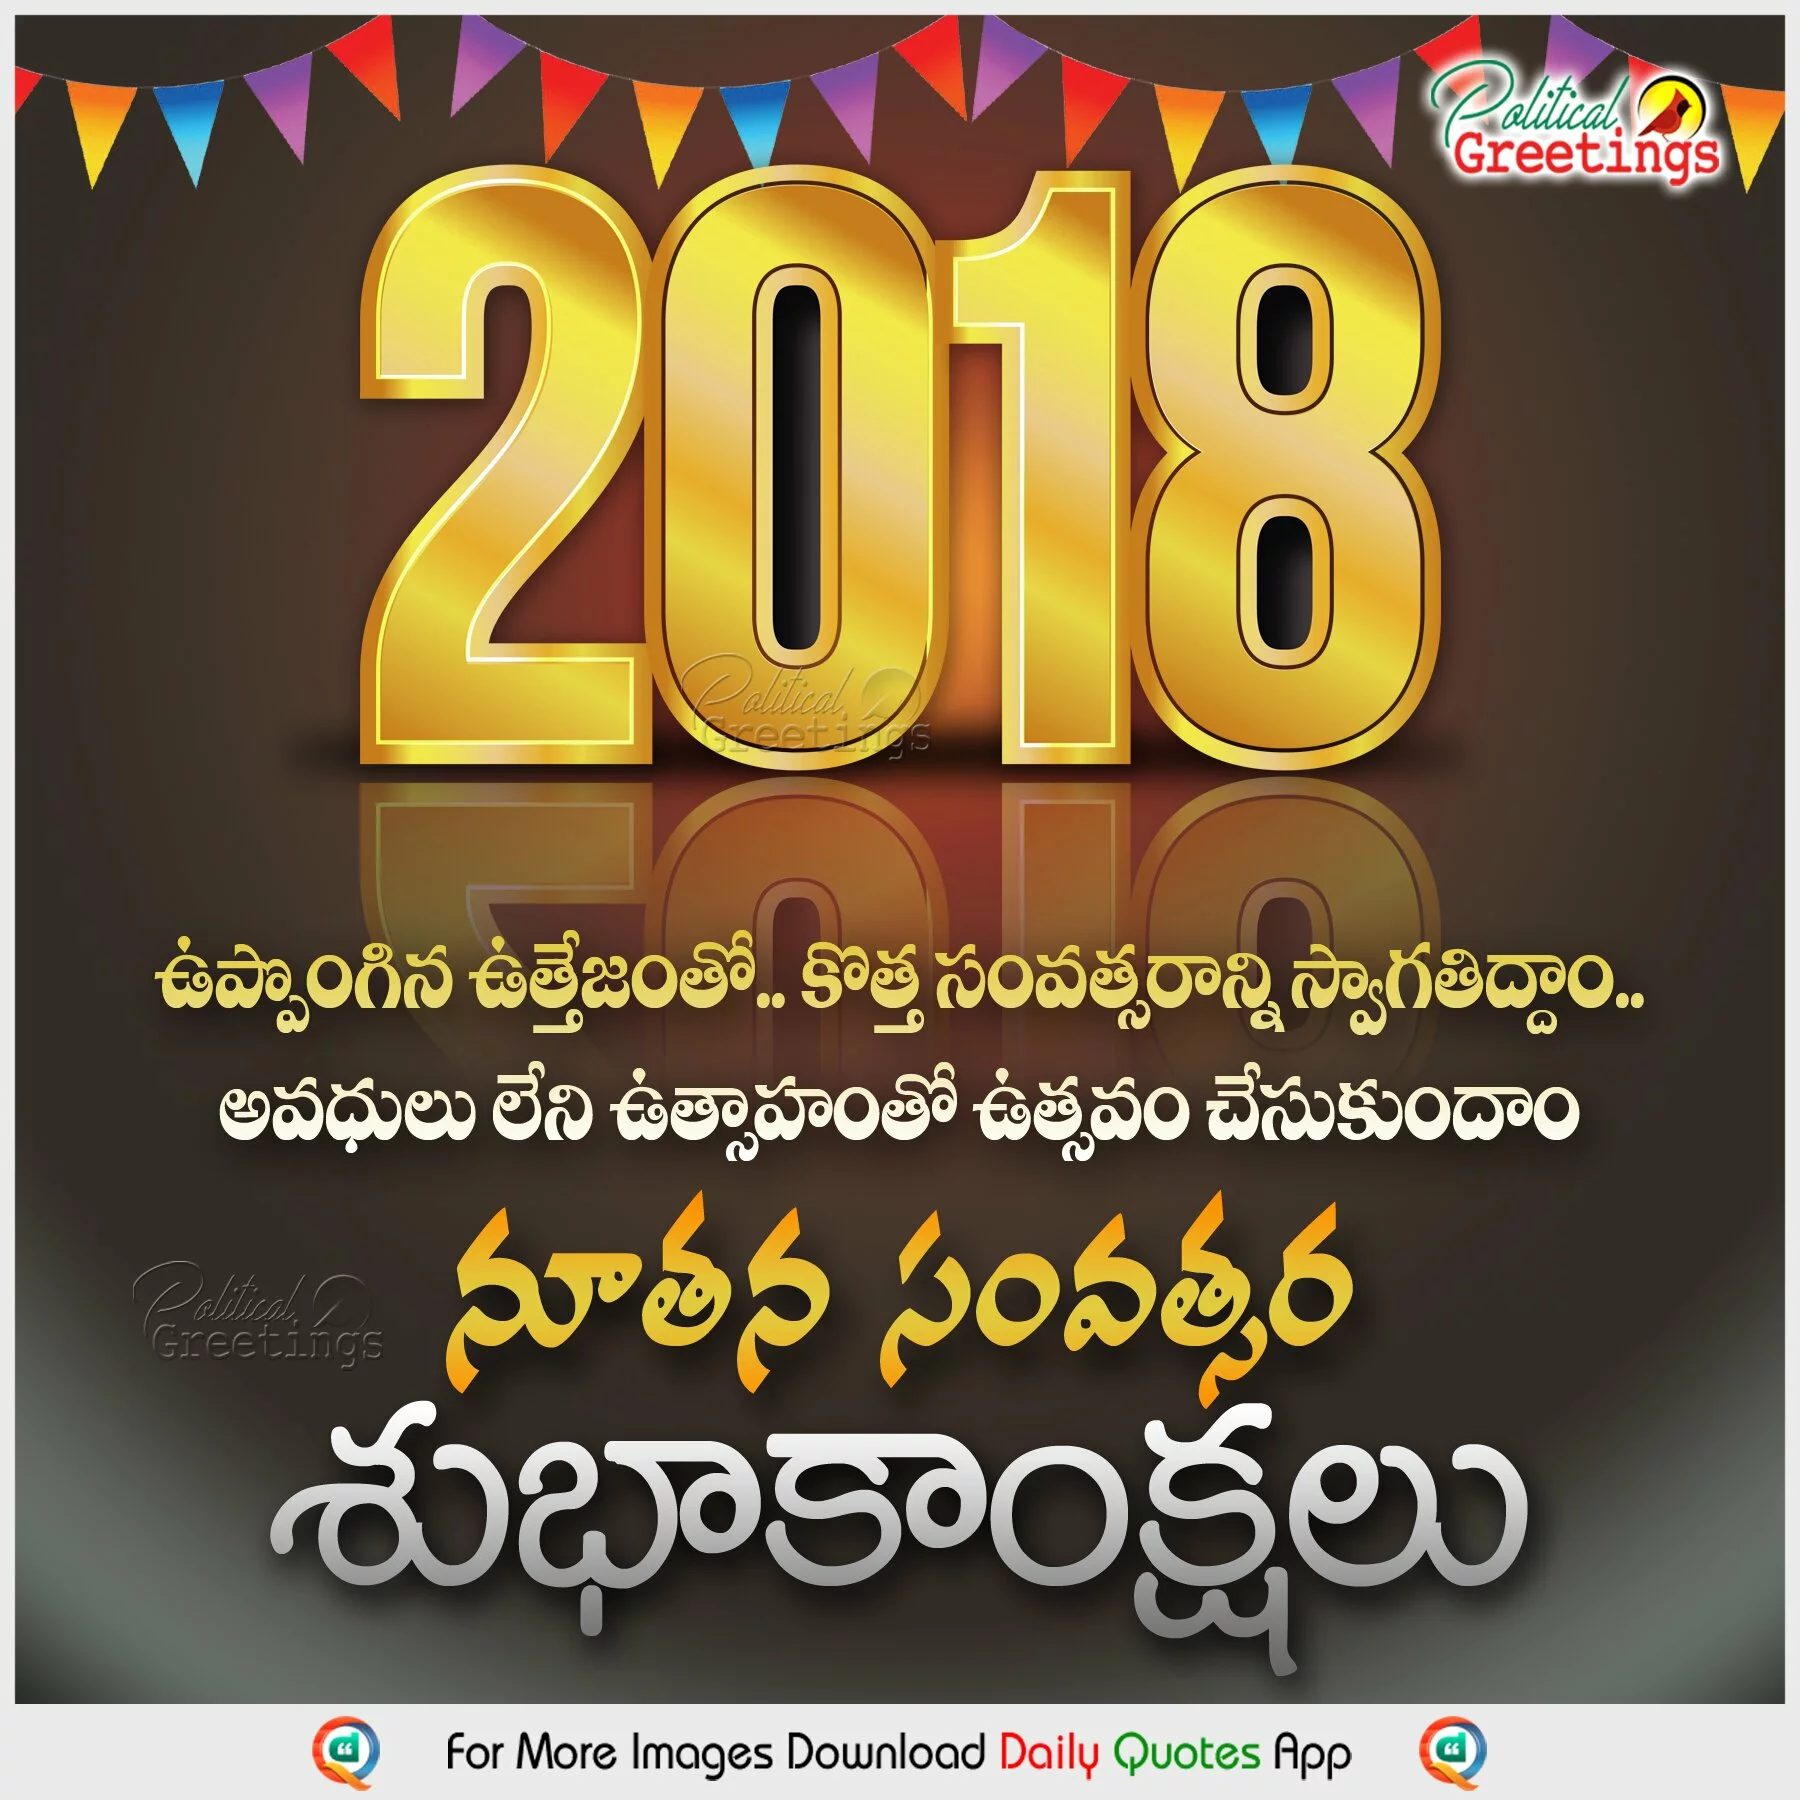 Latest Advanced New Year Greetings with hd wallpapers in Telugu-Happy New year Telugu Greetings